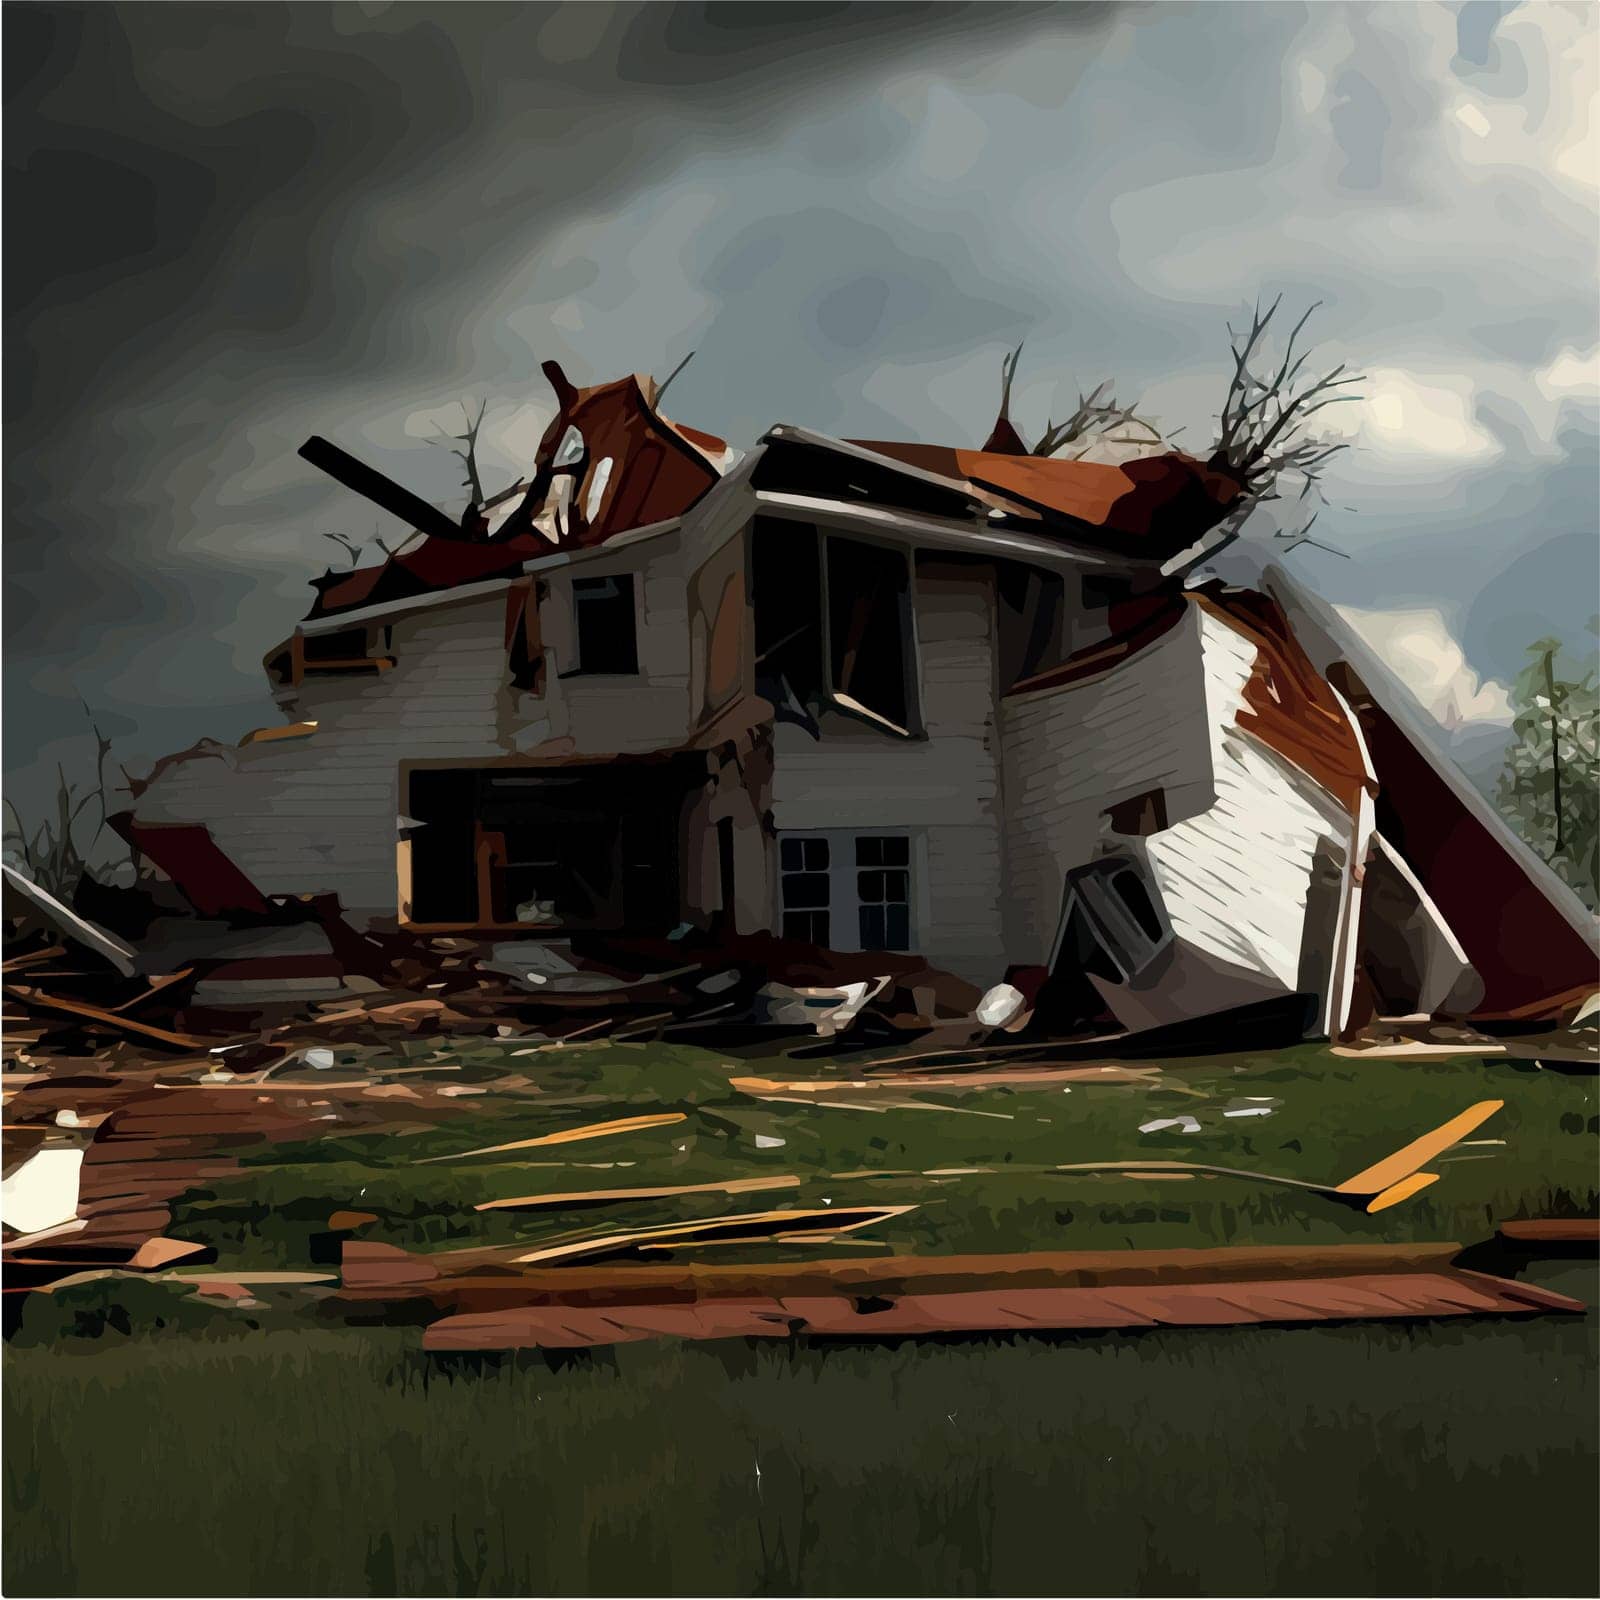 Big storm producing tornado causing destruction, destroyed houses dark sky with storm clouds and rain. Vector illustration.